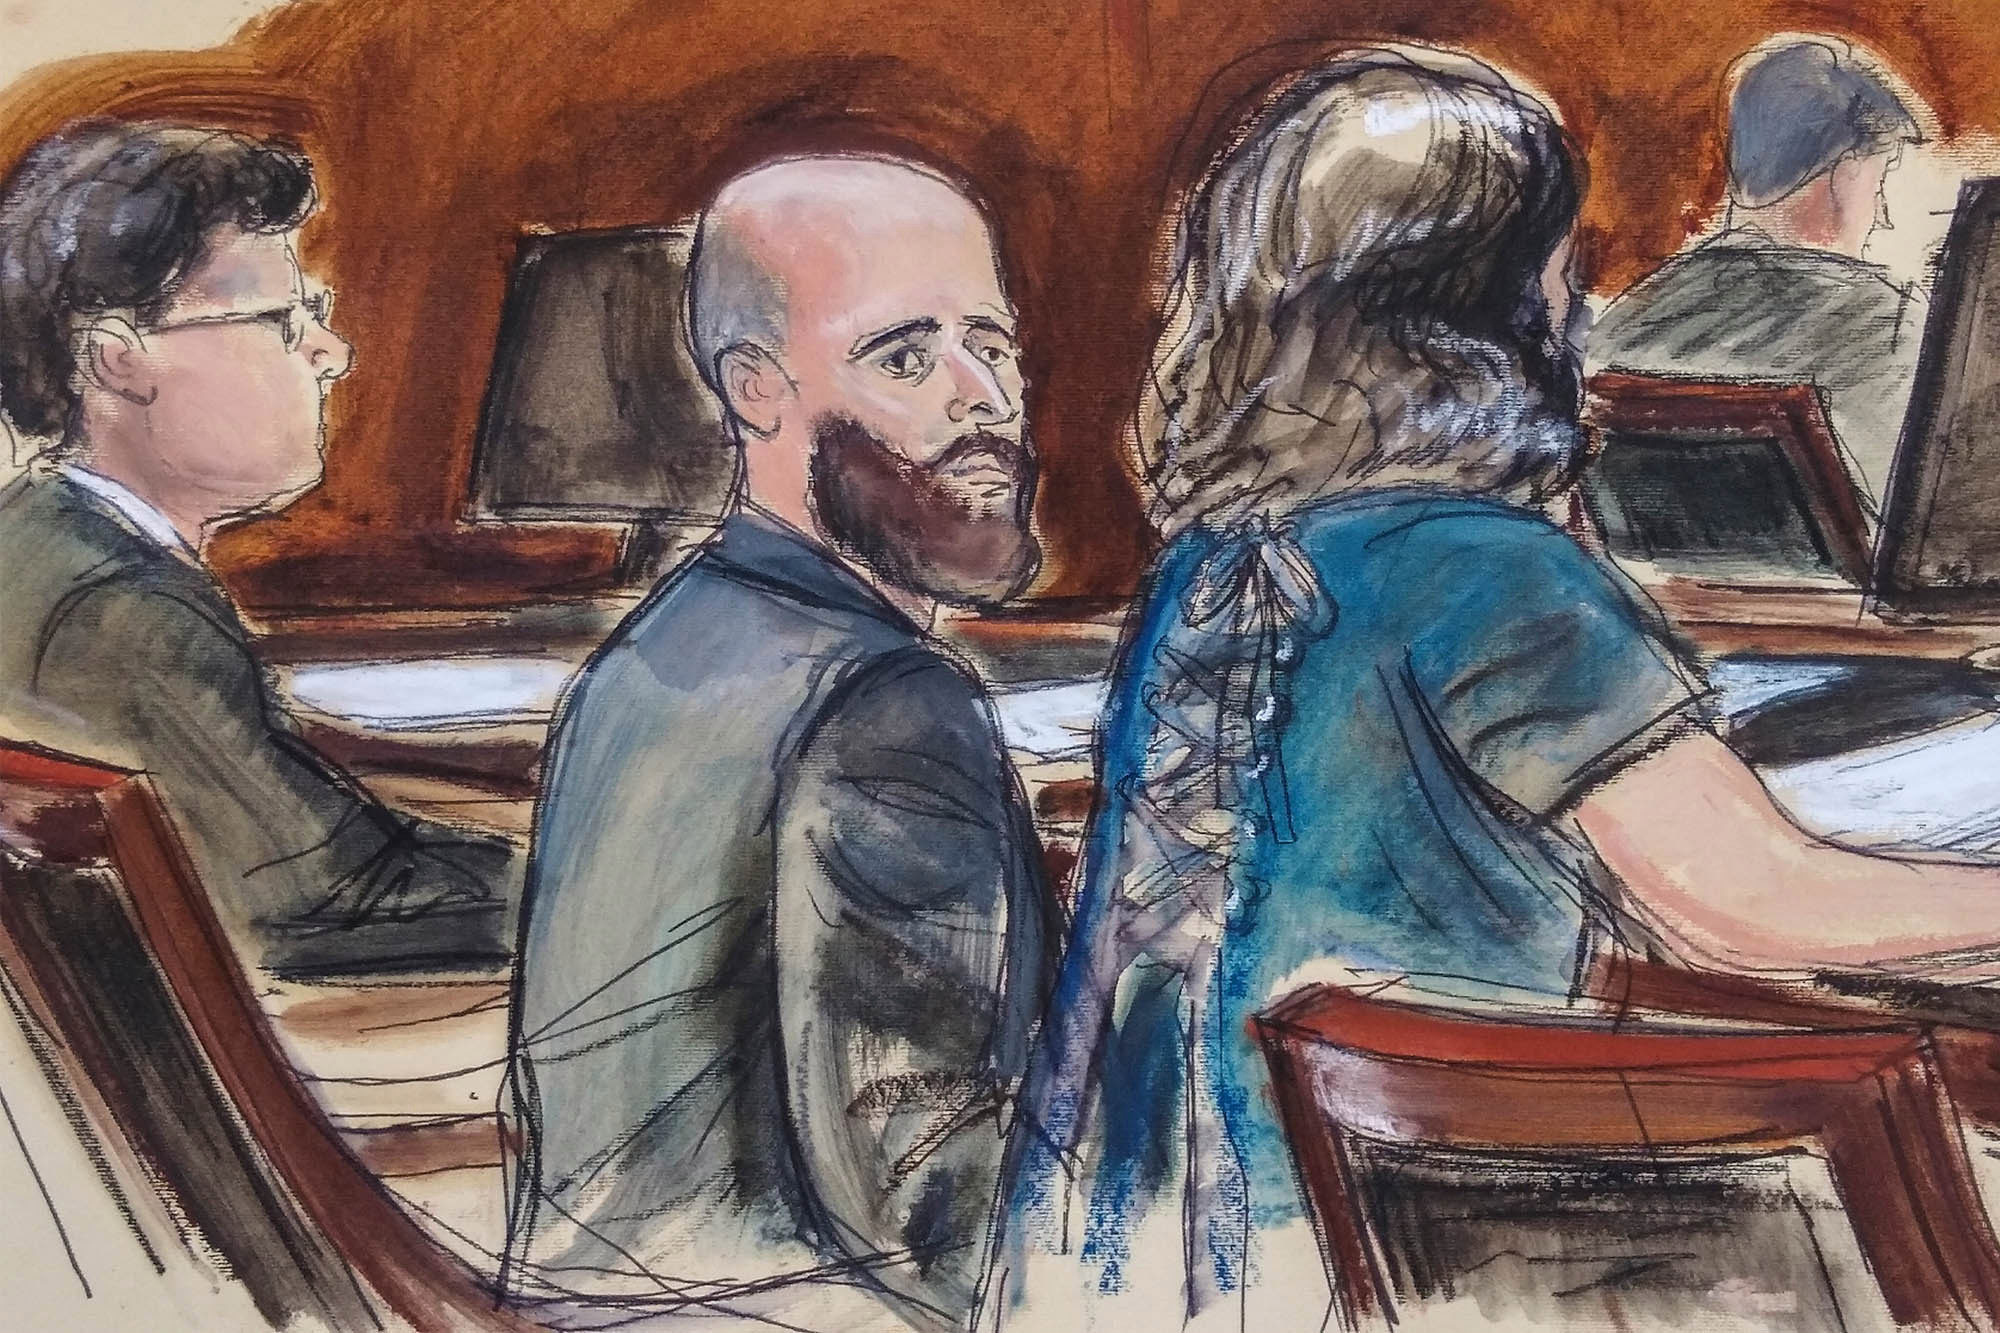 A courtroom sketch of Joshua Schulte.